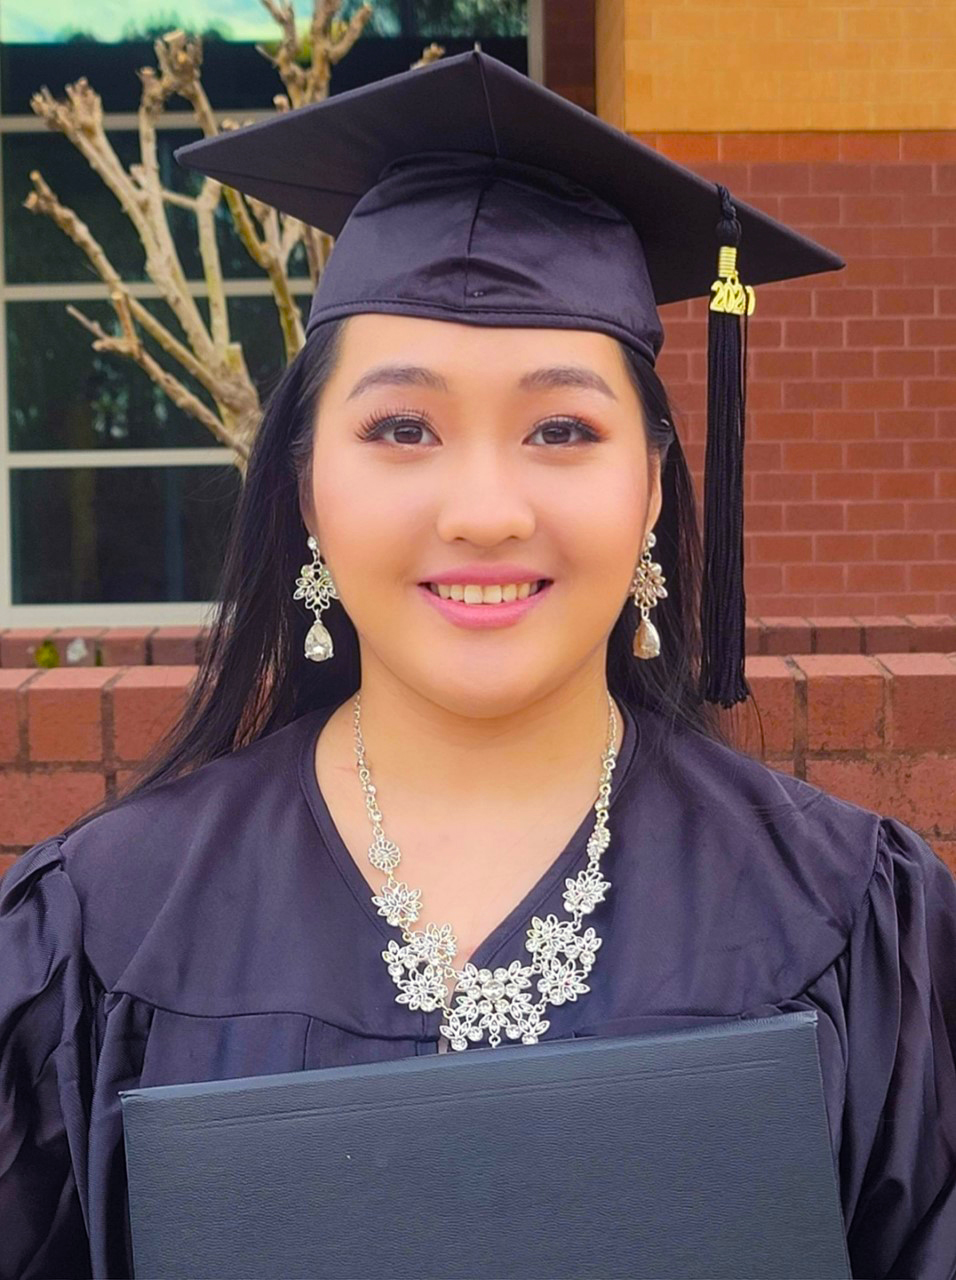 April Xiong stands in her cap and gown holding her diploma.